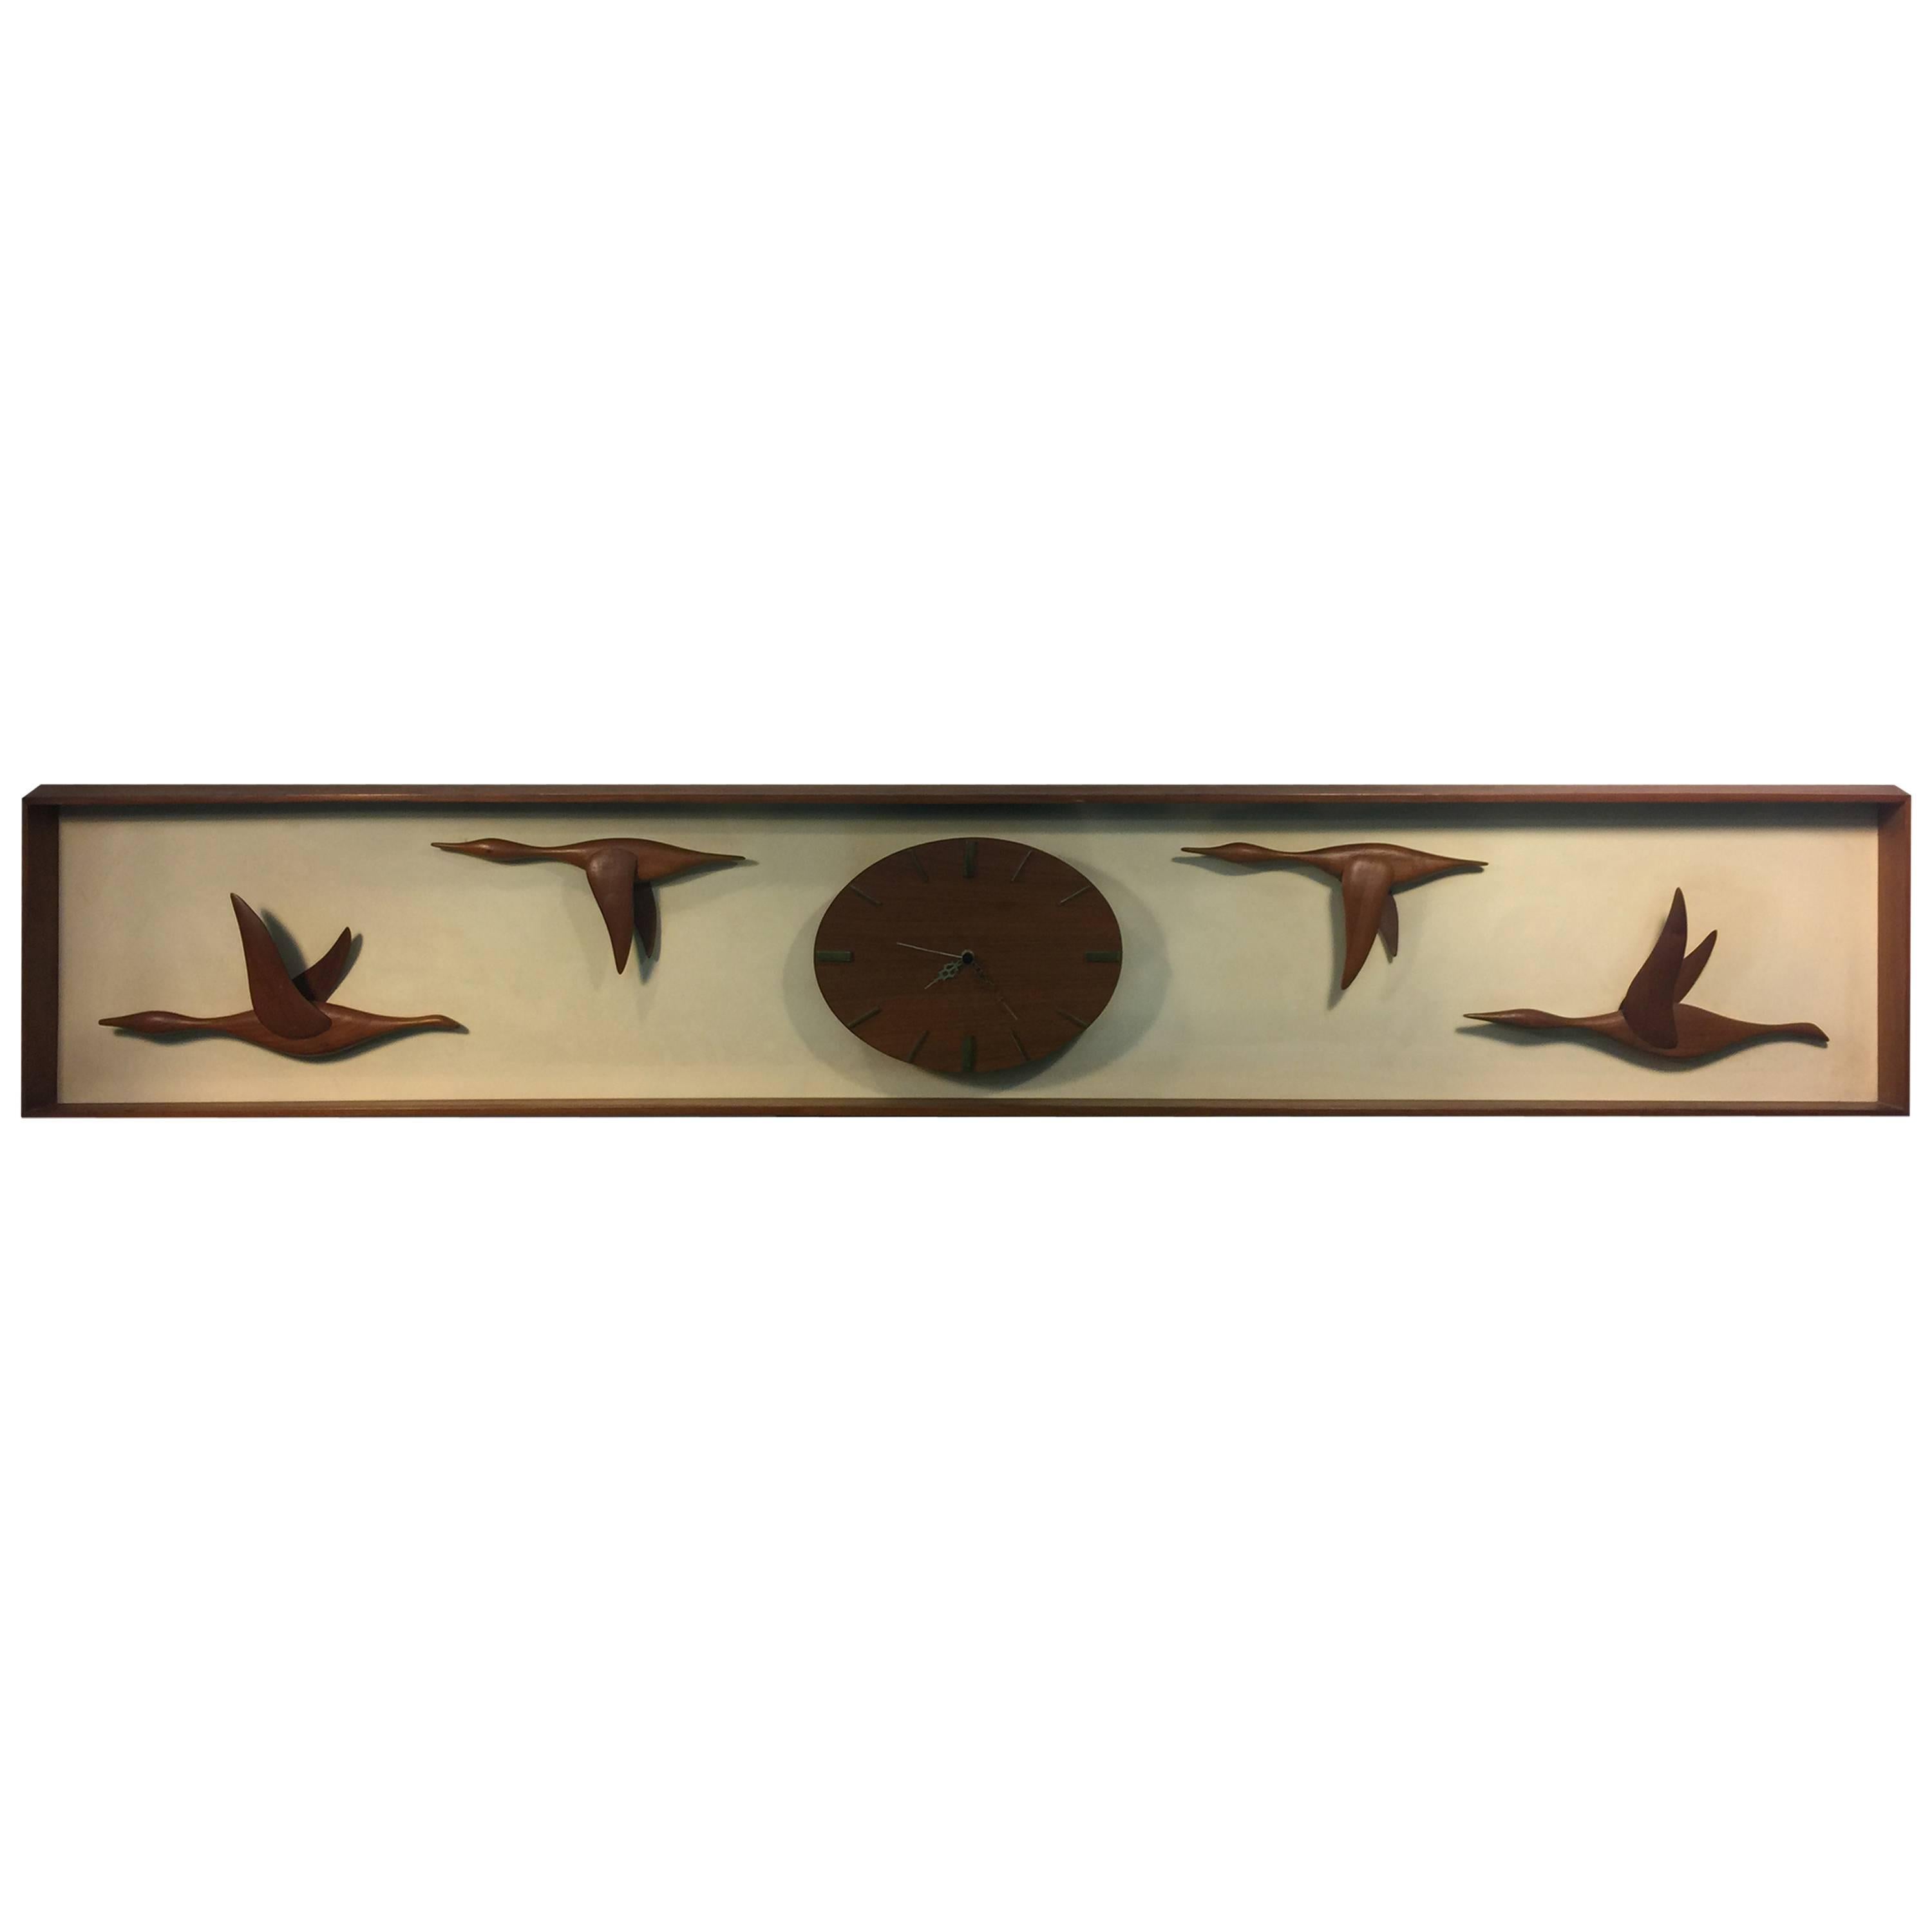 Fantastic Mid-Century Modern Hand-Sculpted Geese in Flight Wall Clock For Sale